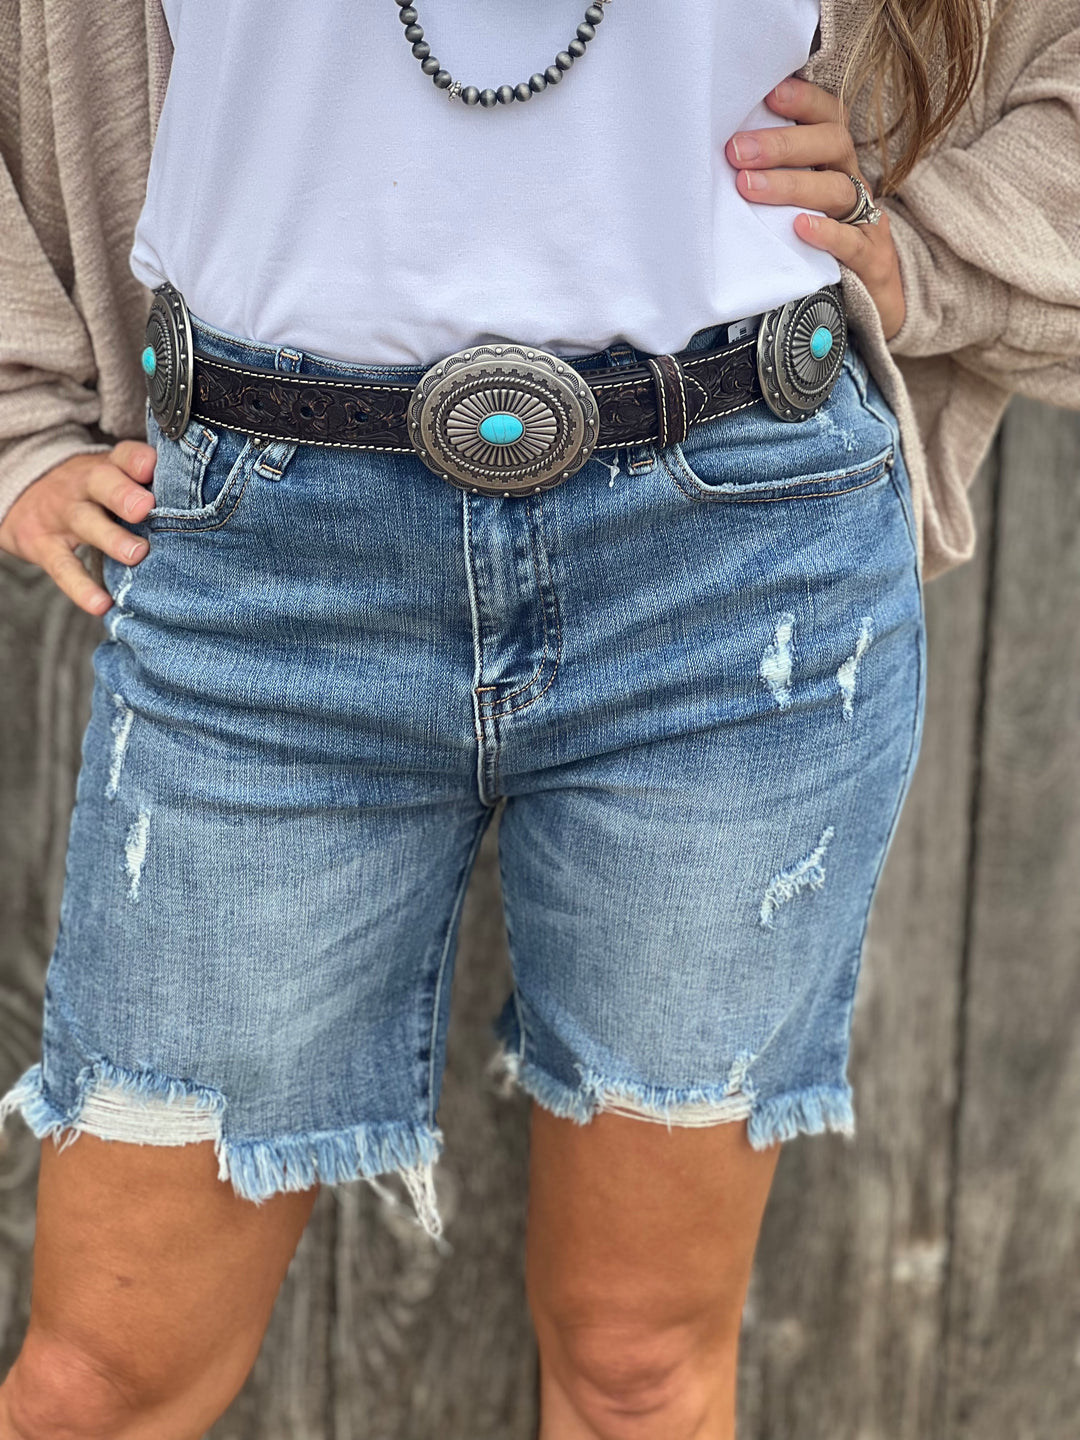 Alpine Brown with Turquoise Concho Belt by Ariat